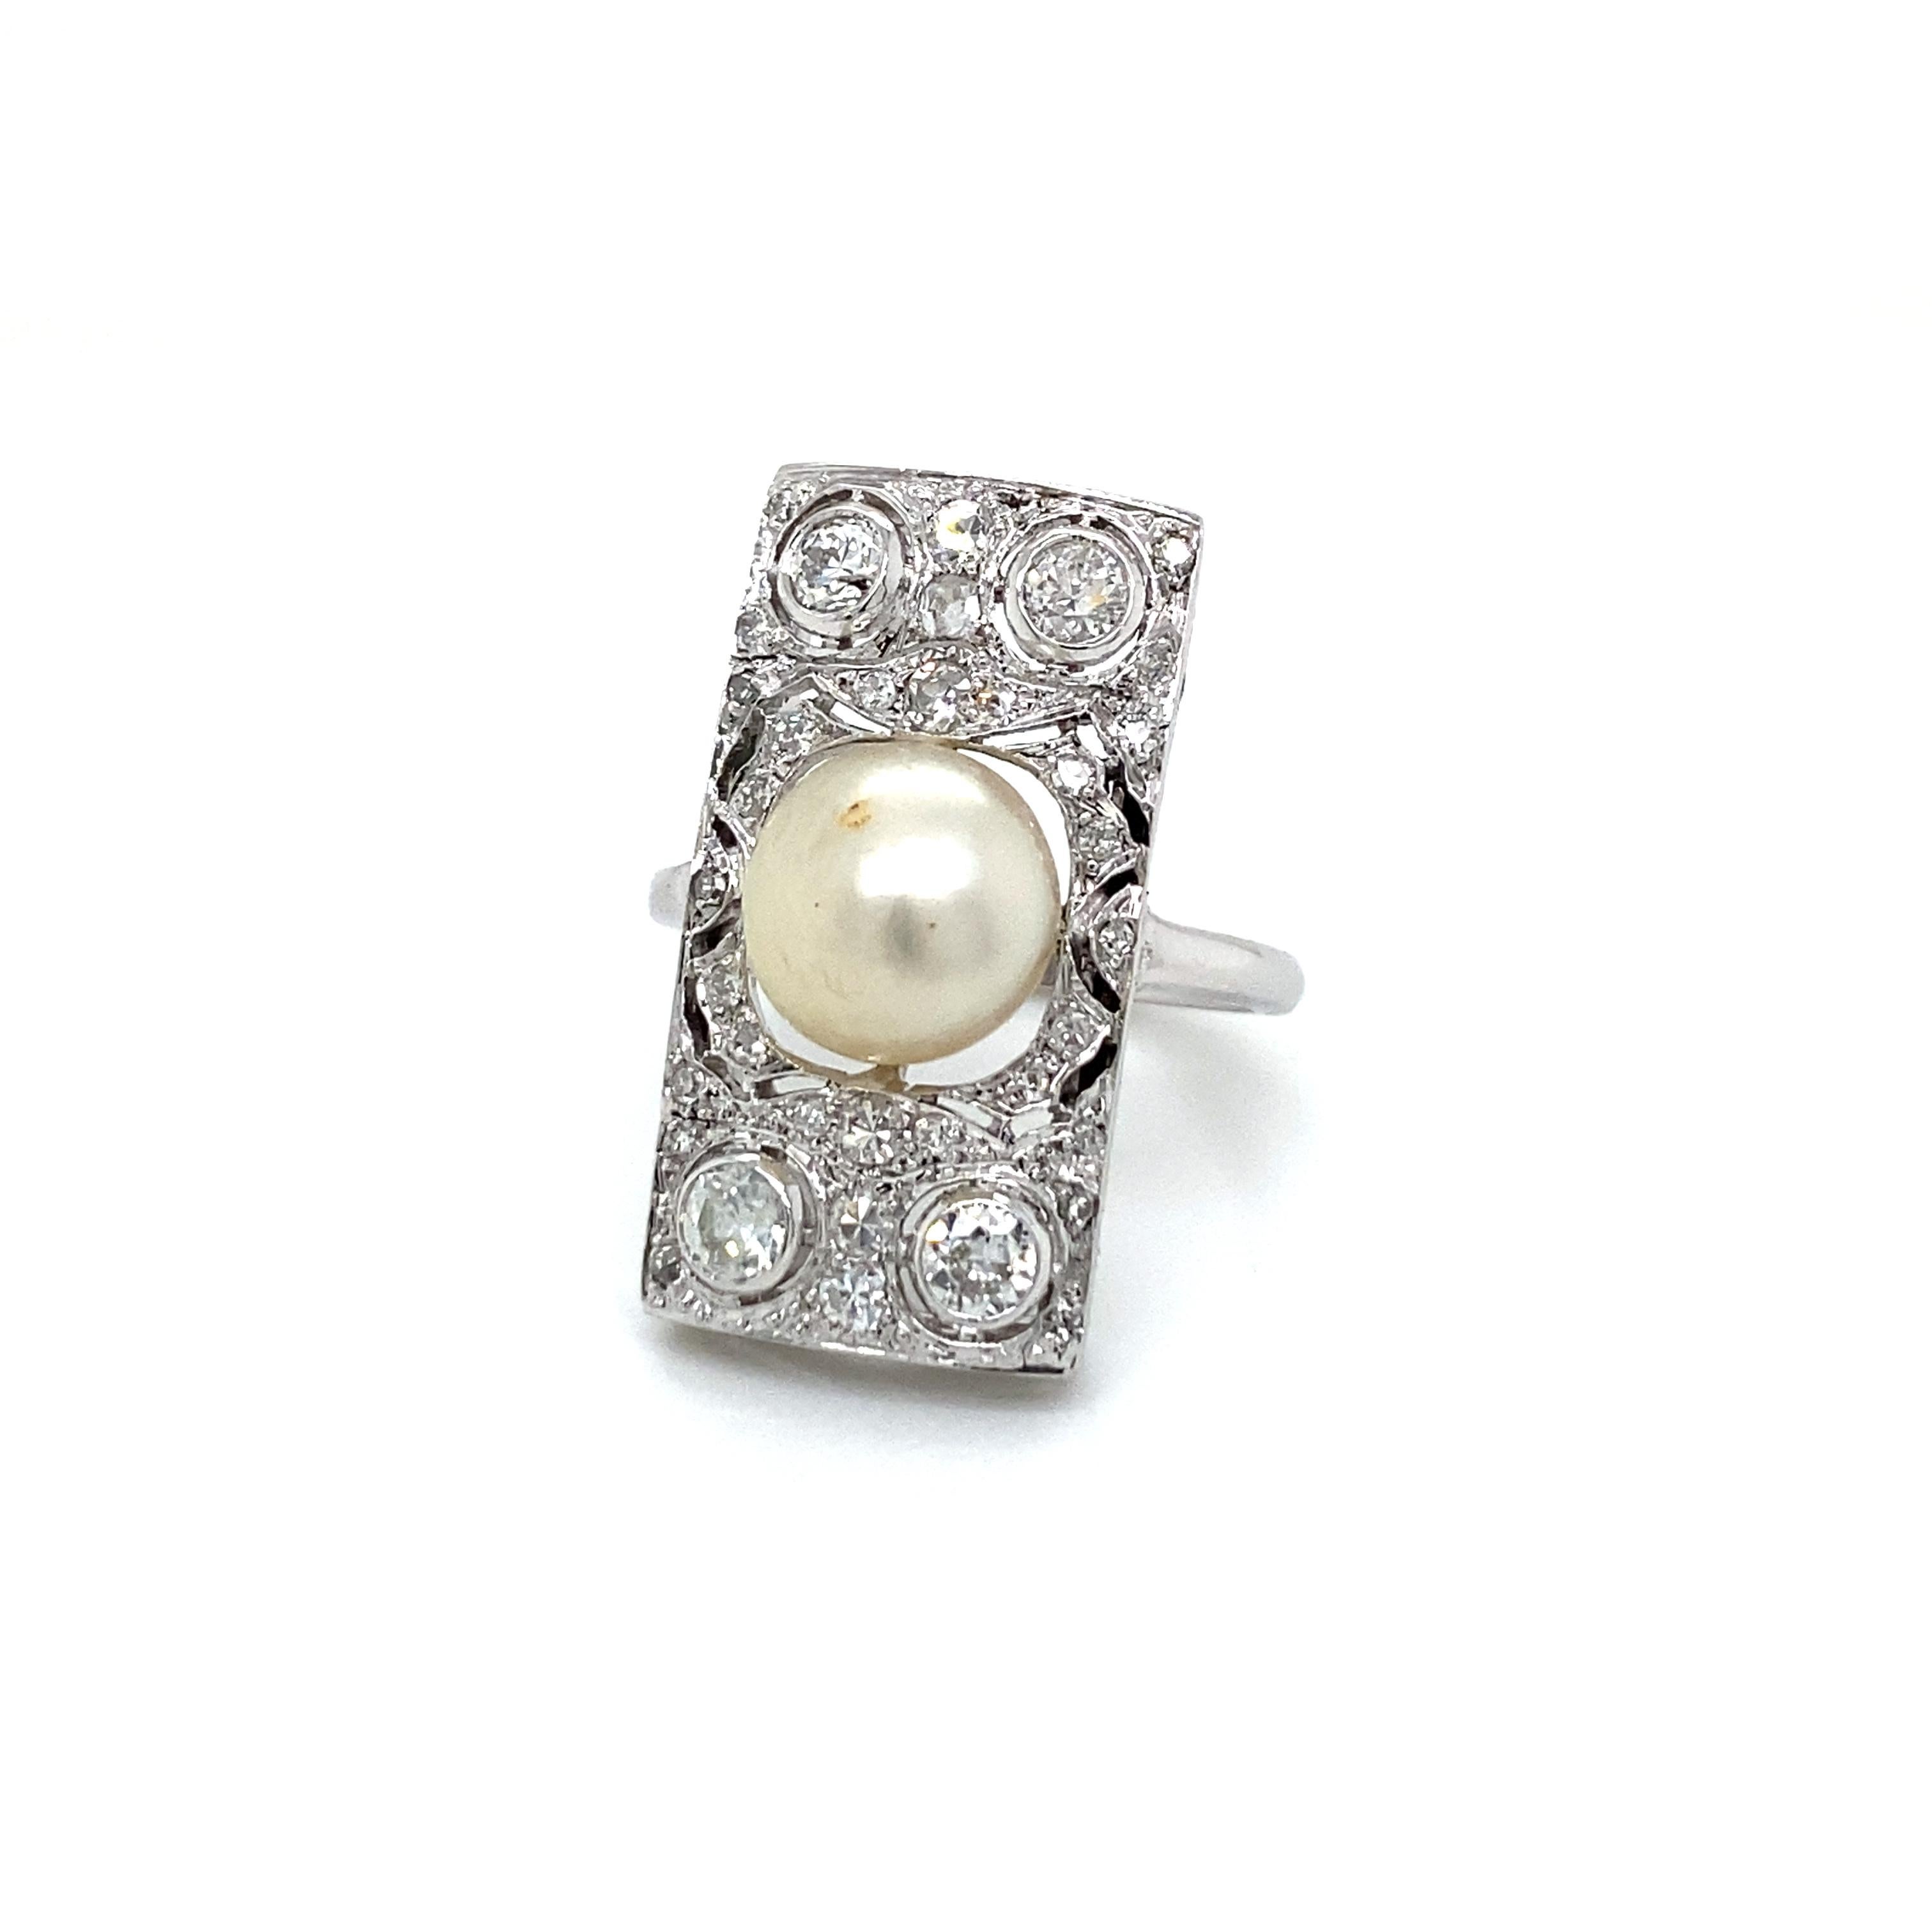 Genuine Beautiful Art Deco Platinum and 18k gold ring, it features in the center of the plaque one Keshi pearl and four large Old Mine cut diamonds at the corners, weighing 0.40 cts each, graded H/I color SI1 clarity, adorned by fine engraving and